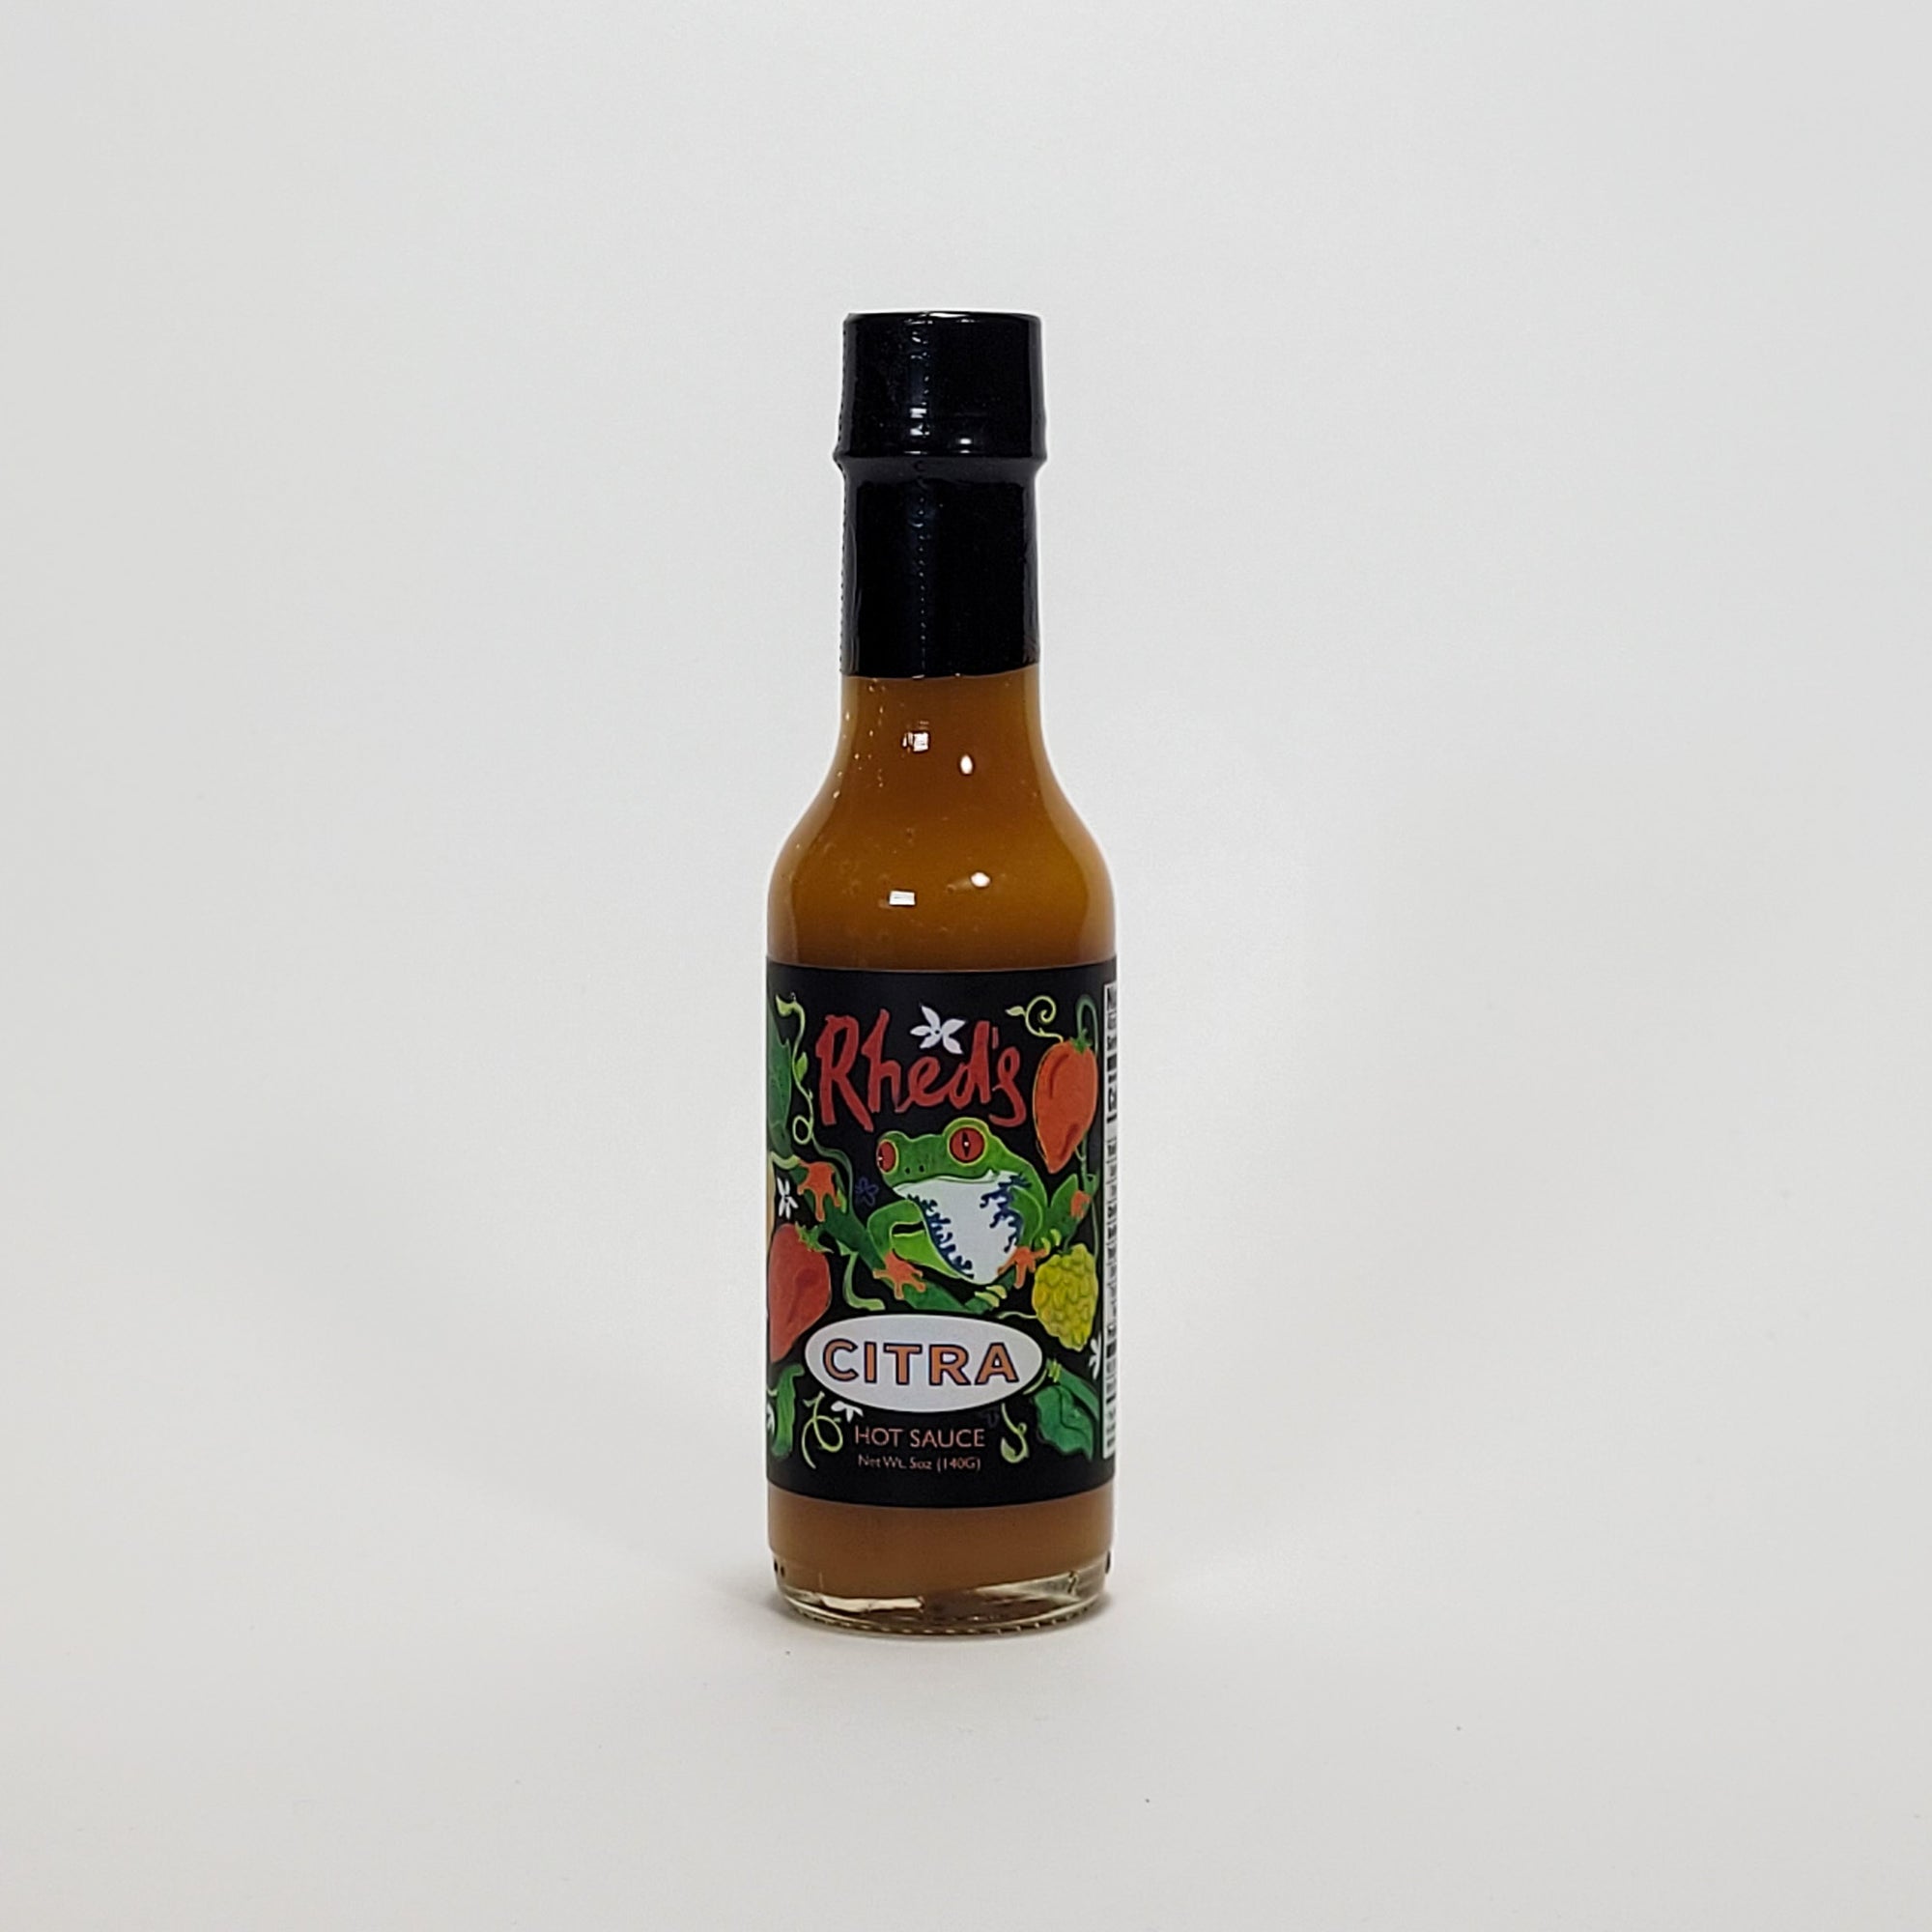 Rhed's Citra hot sauce